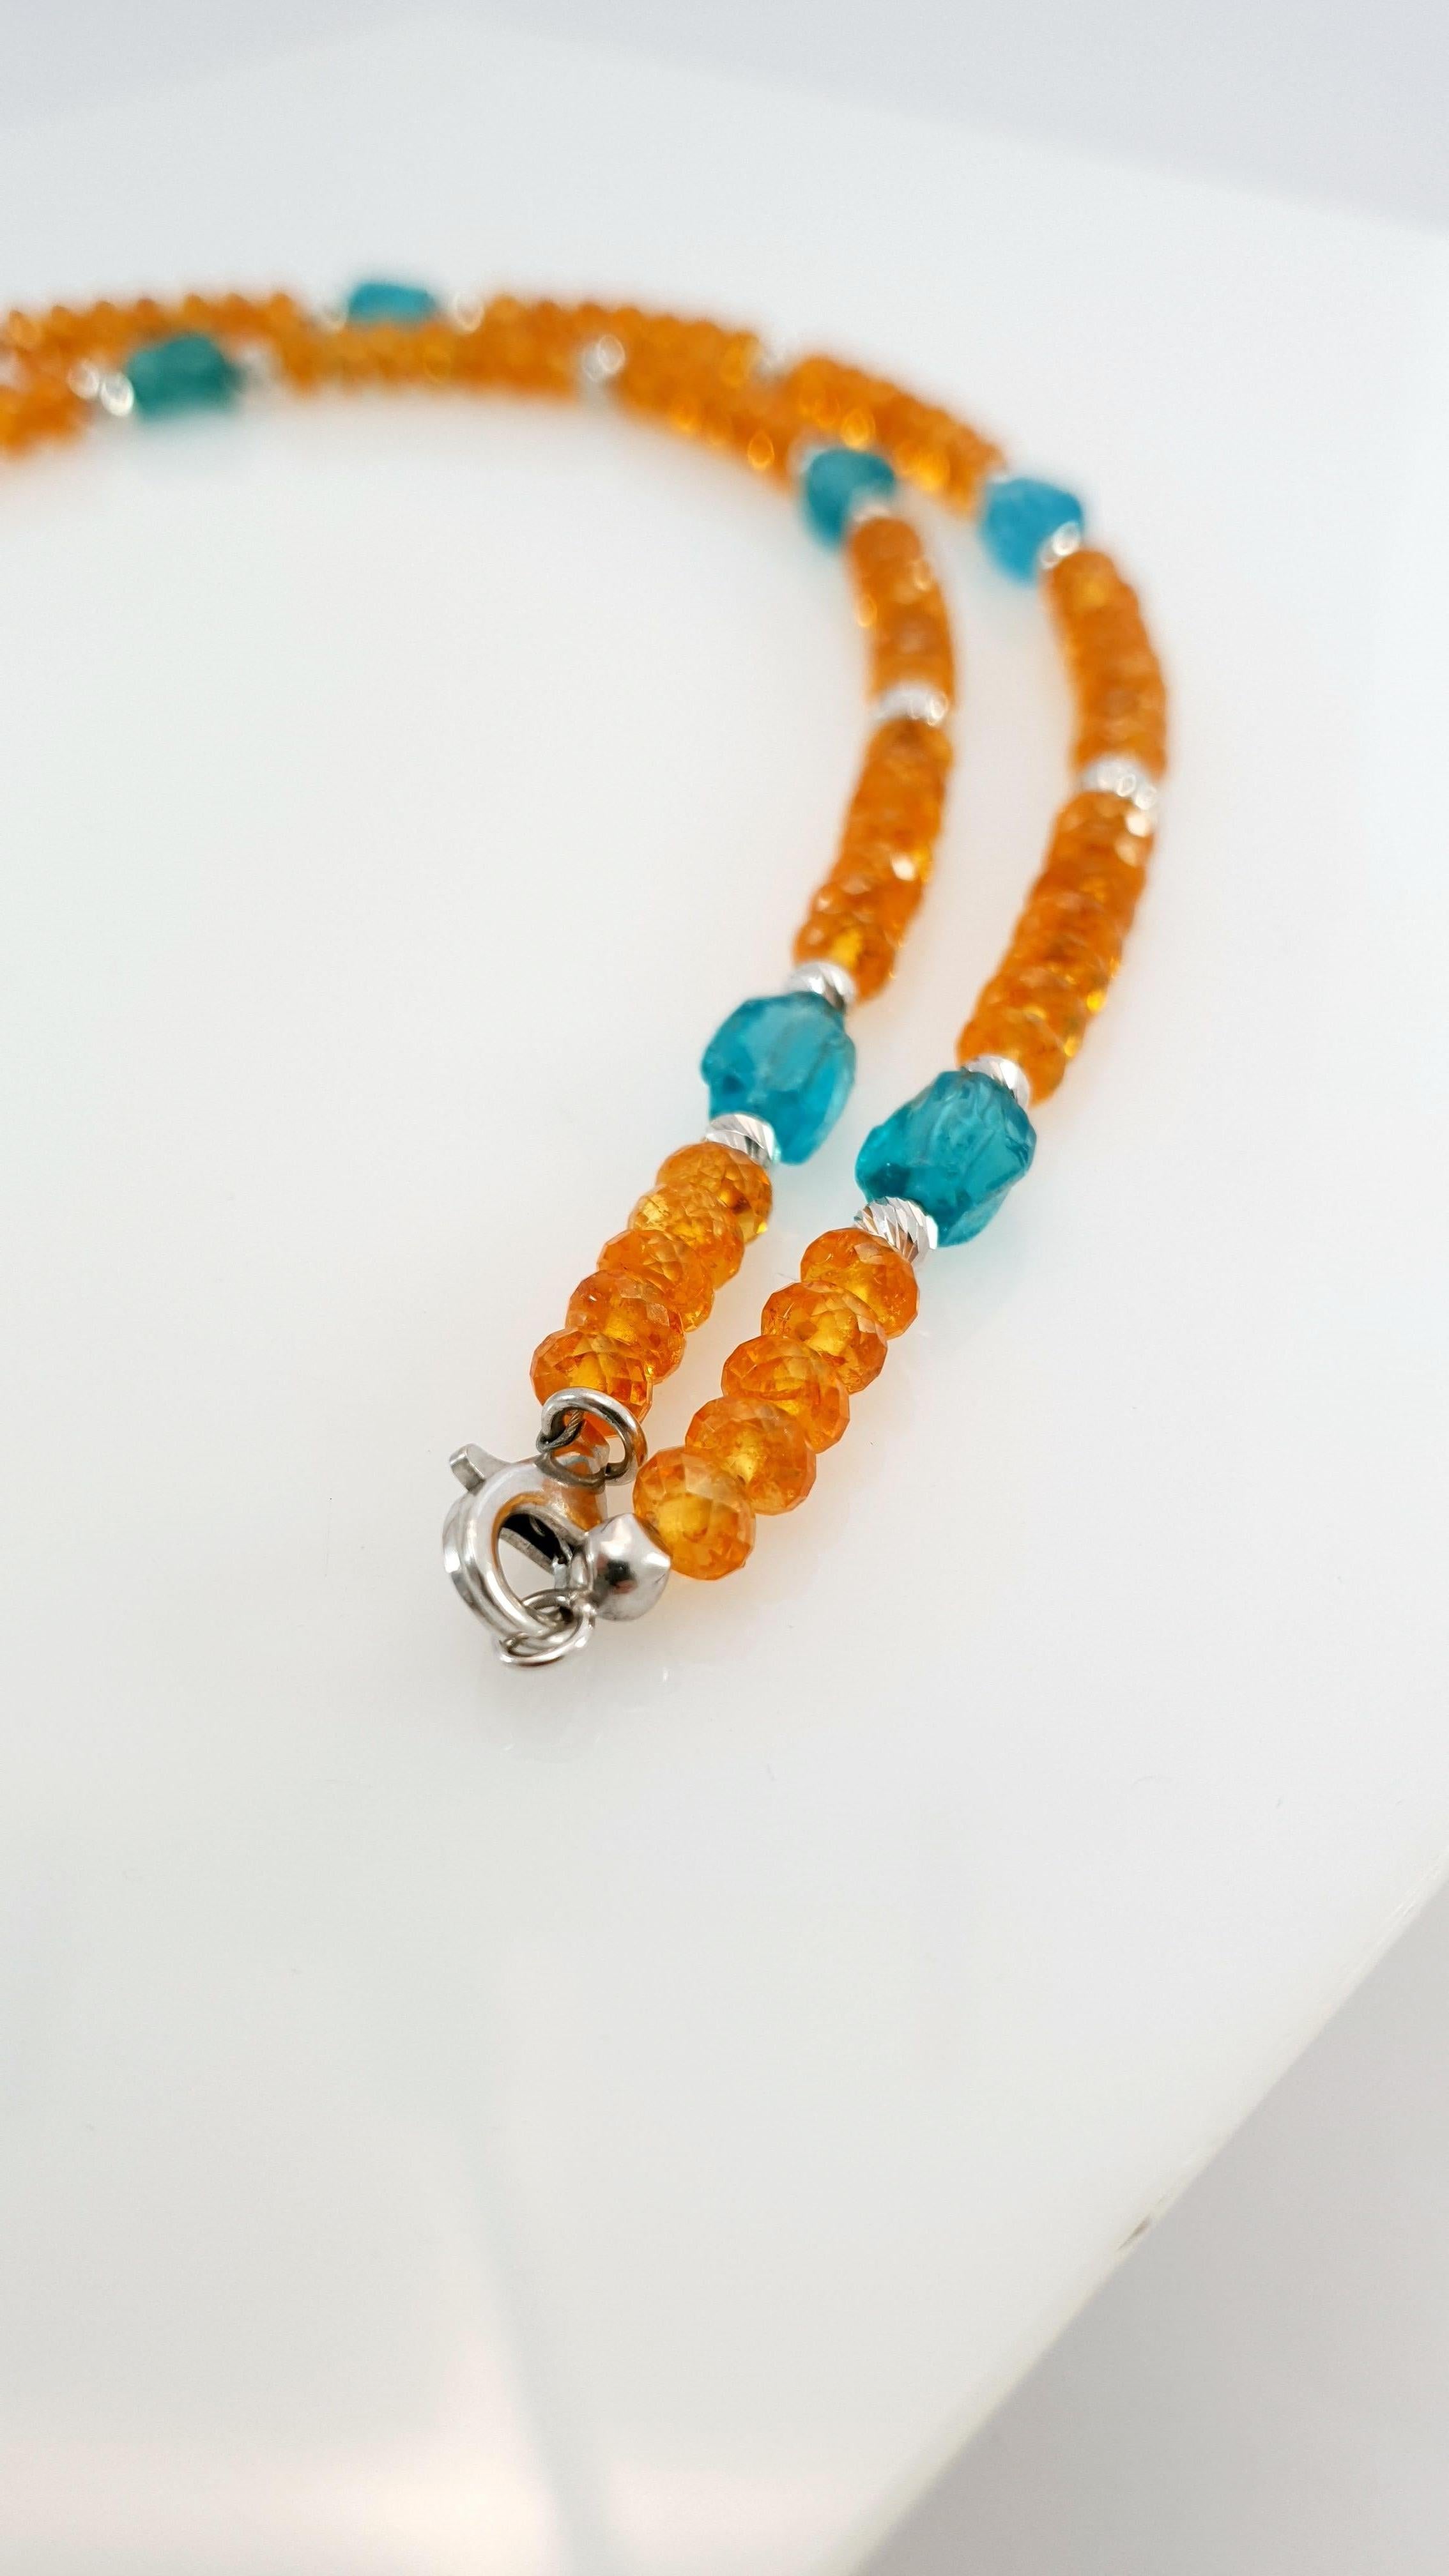 Orange Garnets and Paraiba Color Apatite Beads Necklace with 18 Carat White Gold 5